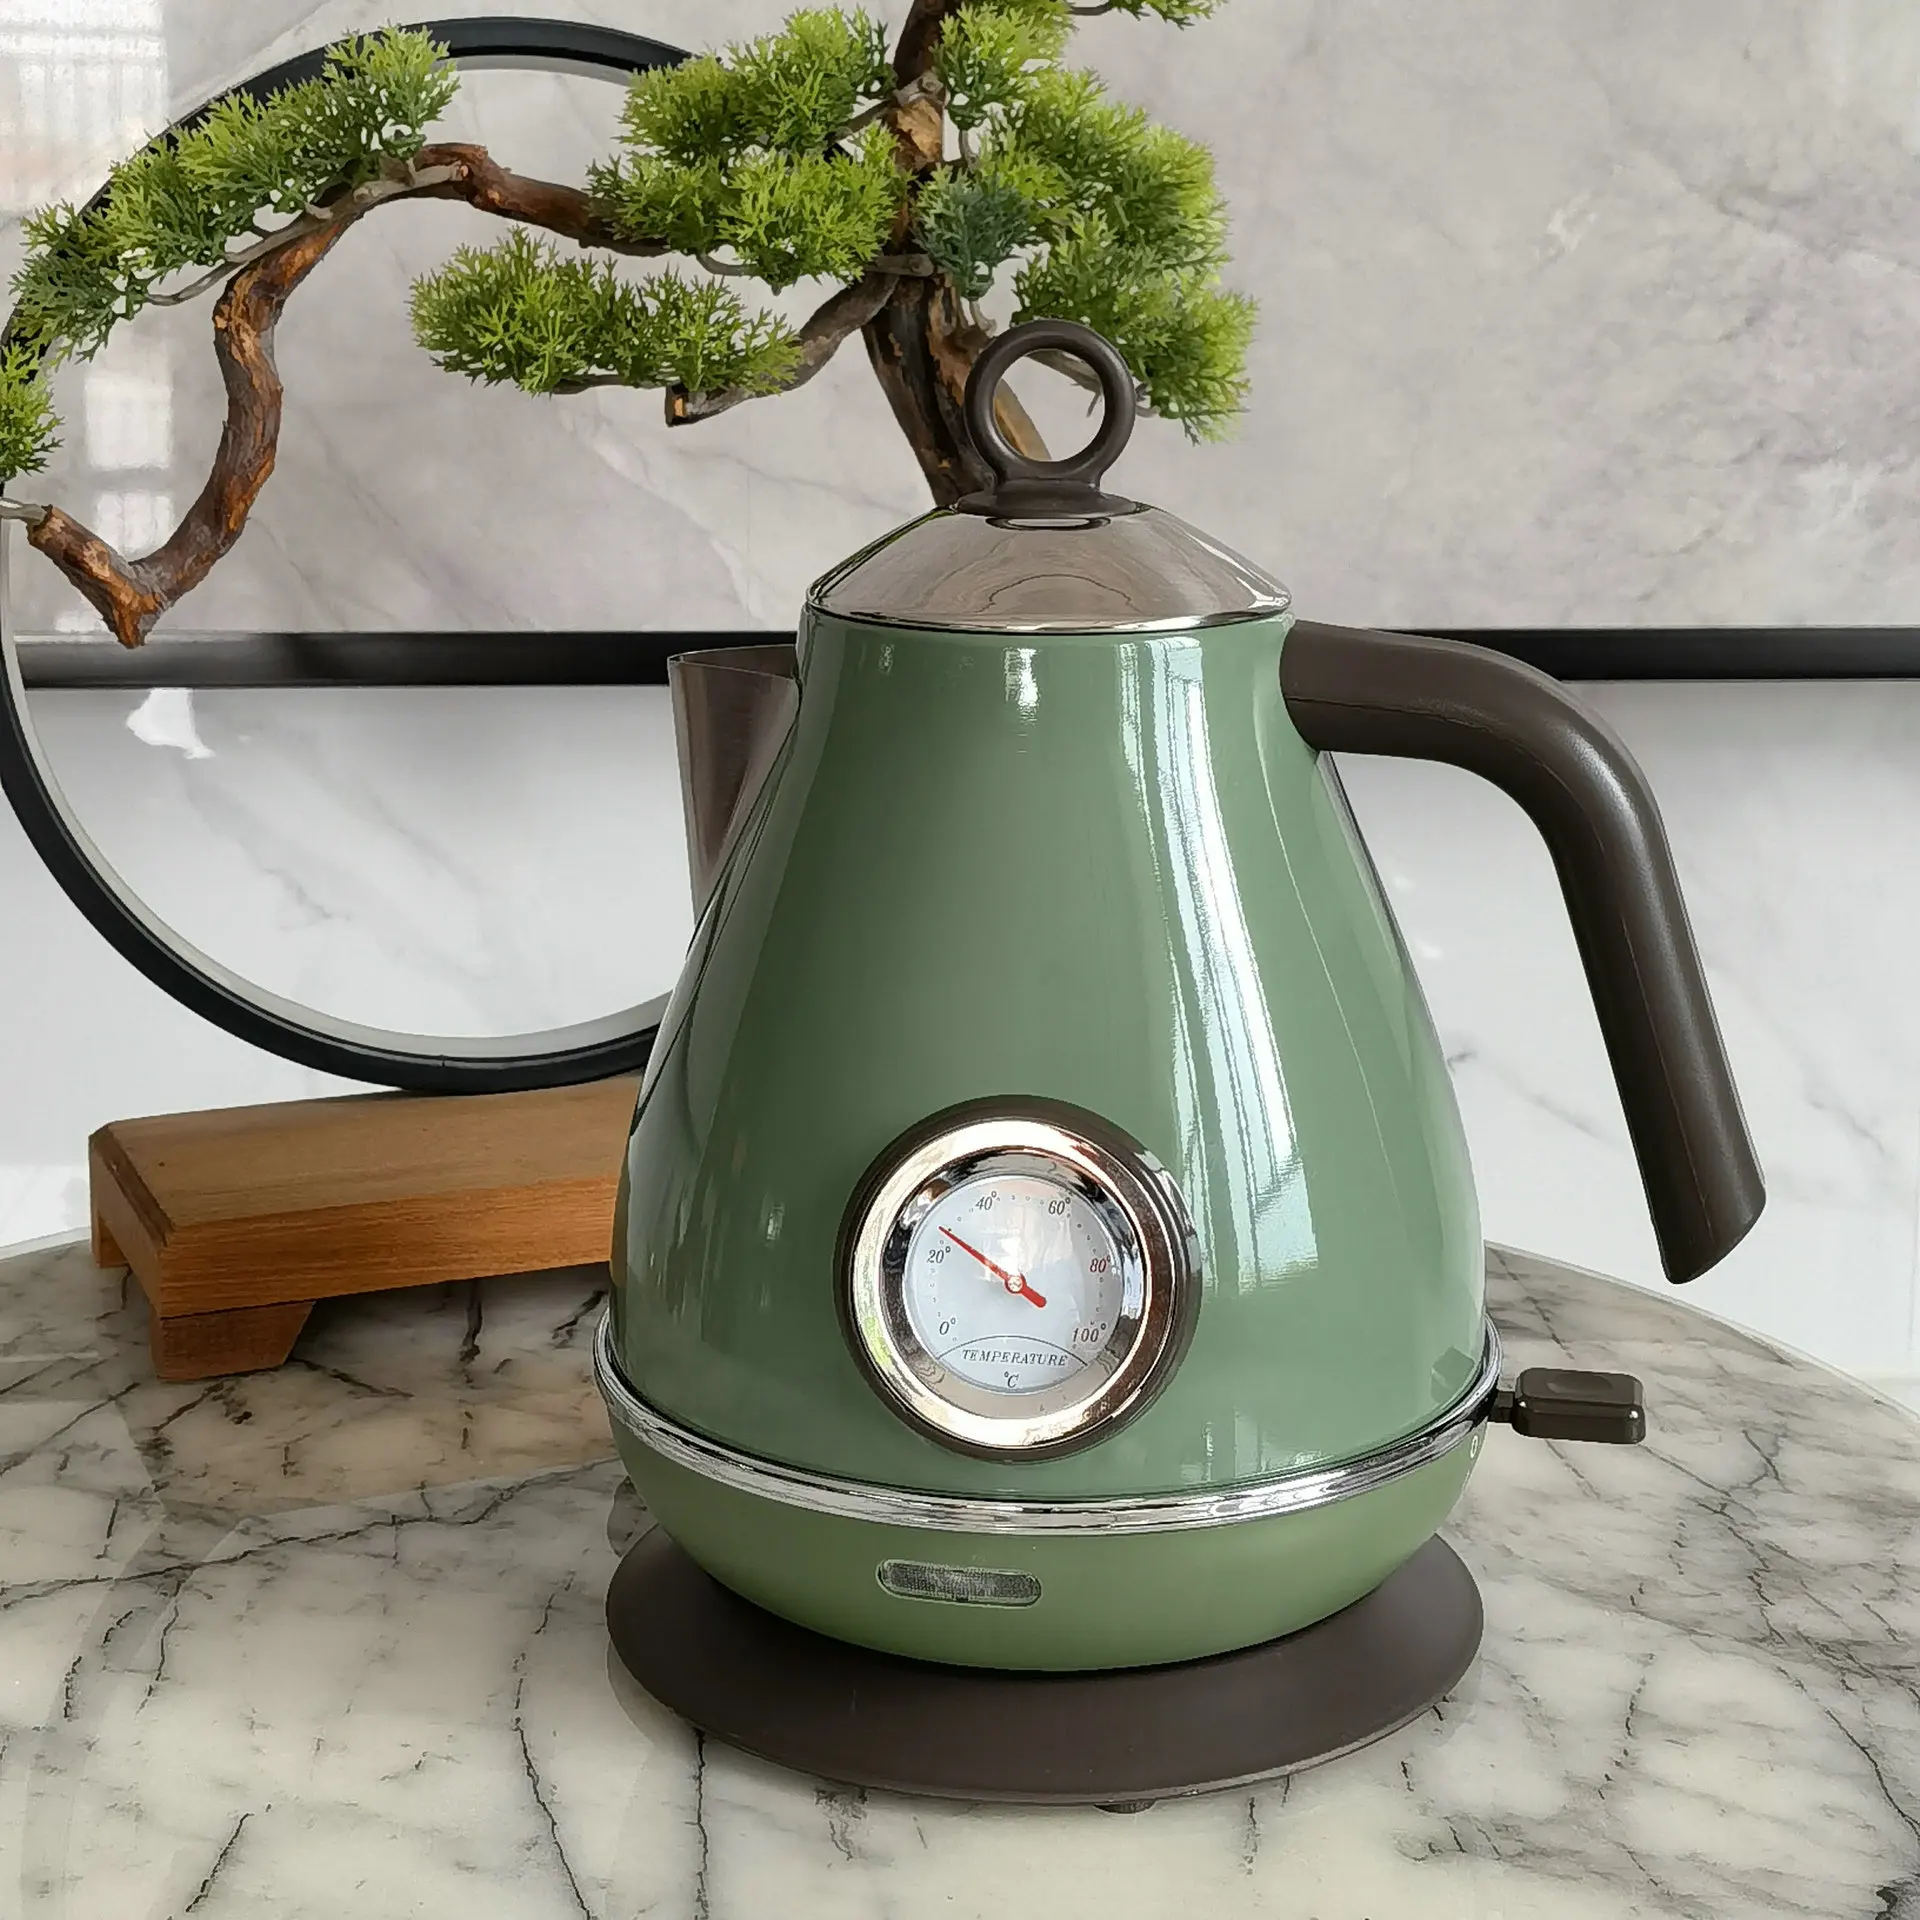 Stainless Steel Retro Paint with Temperature Display Electric Kettle Utility Model Patent Hot Water Boiler retro creative handicraft ornaments decorative book bible storage wooden box flower large size model office